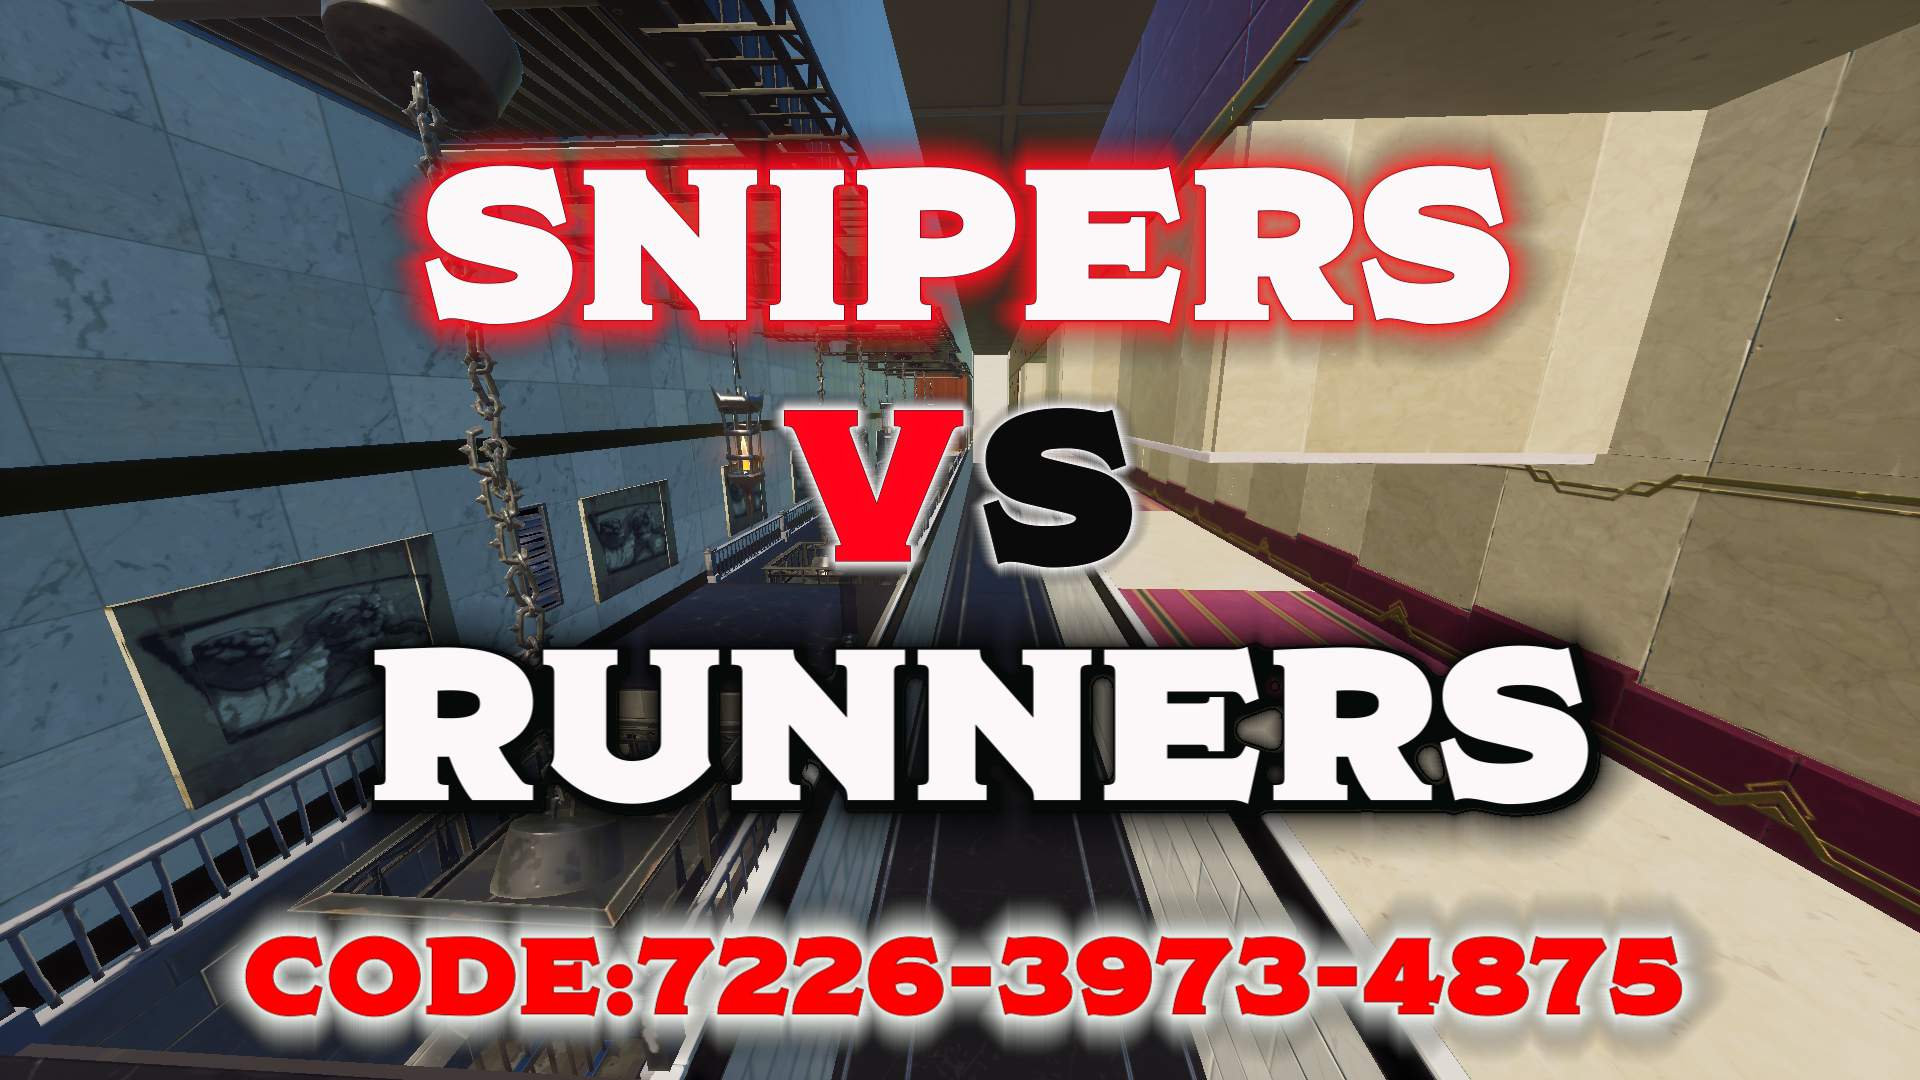 🎯 SNIPERS VS RUNNERS 🏃 (HARD)